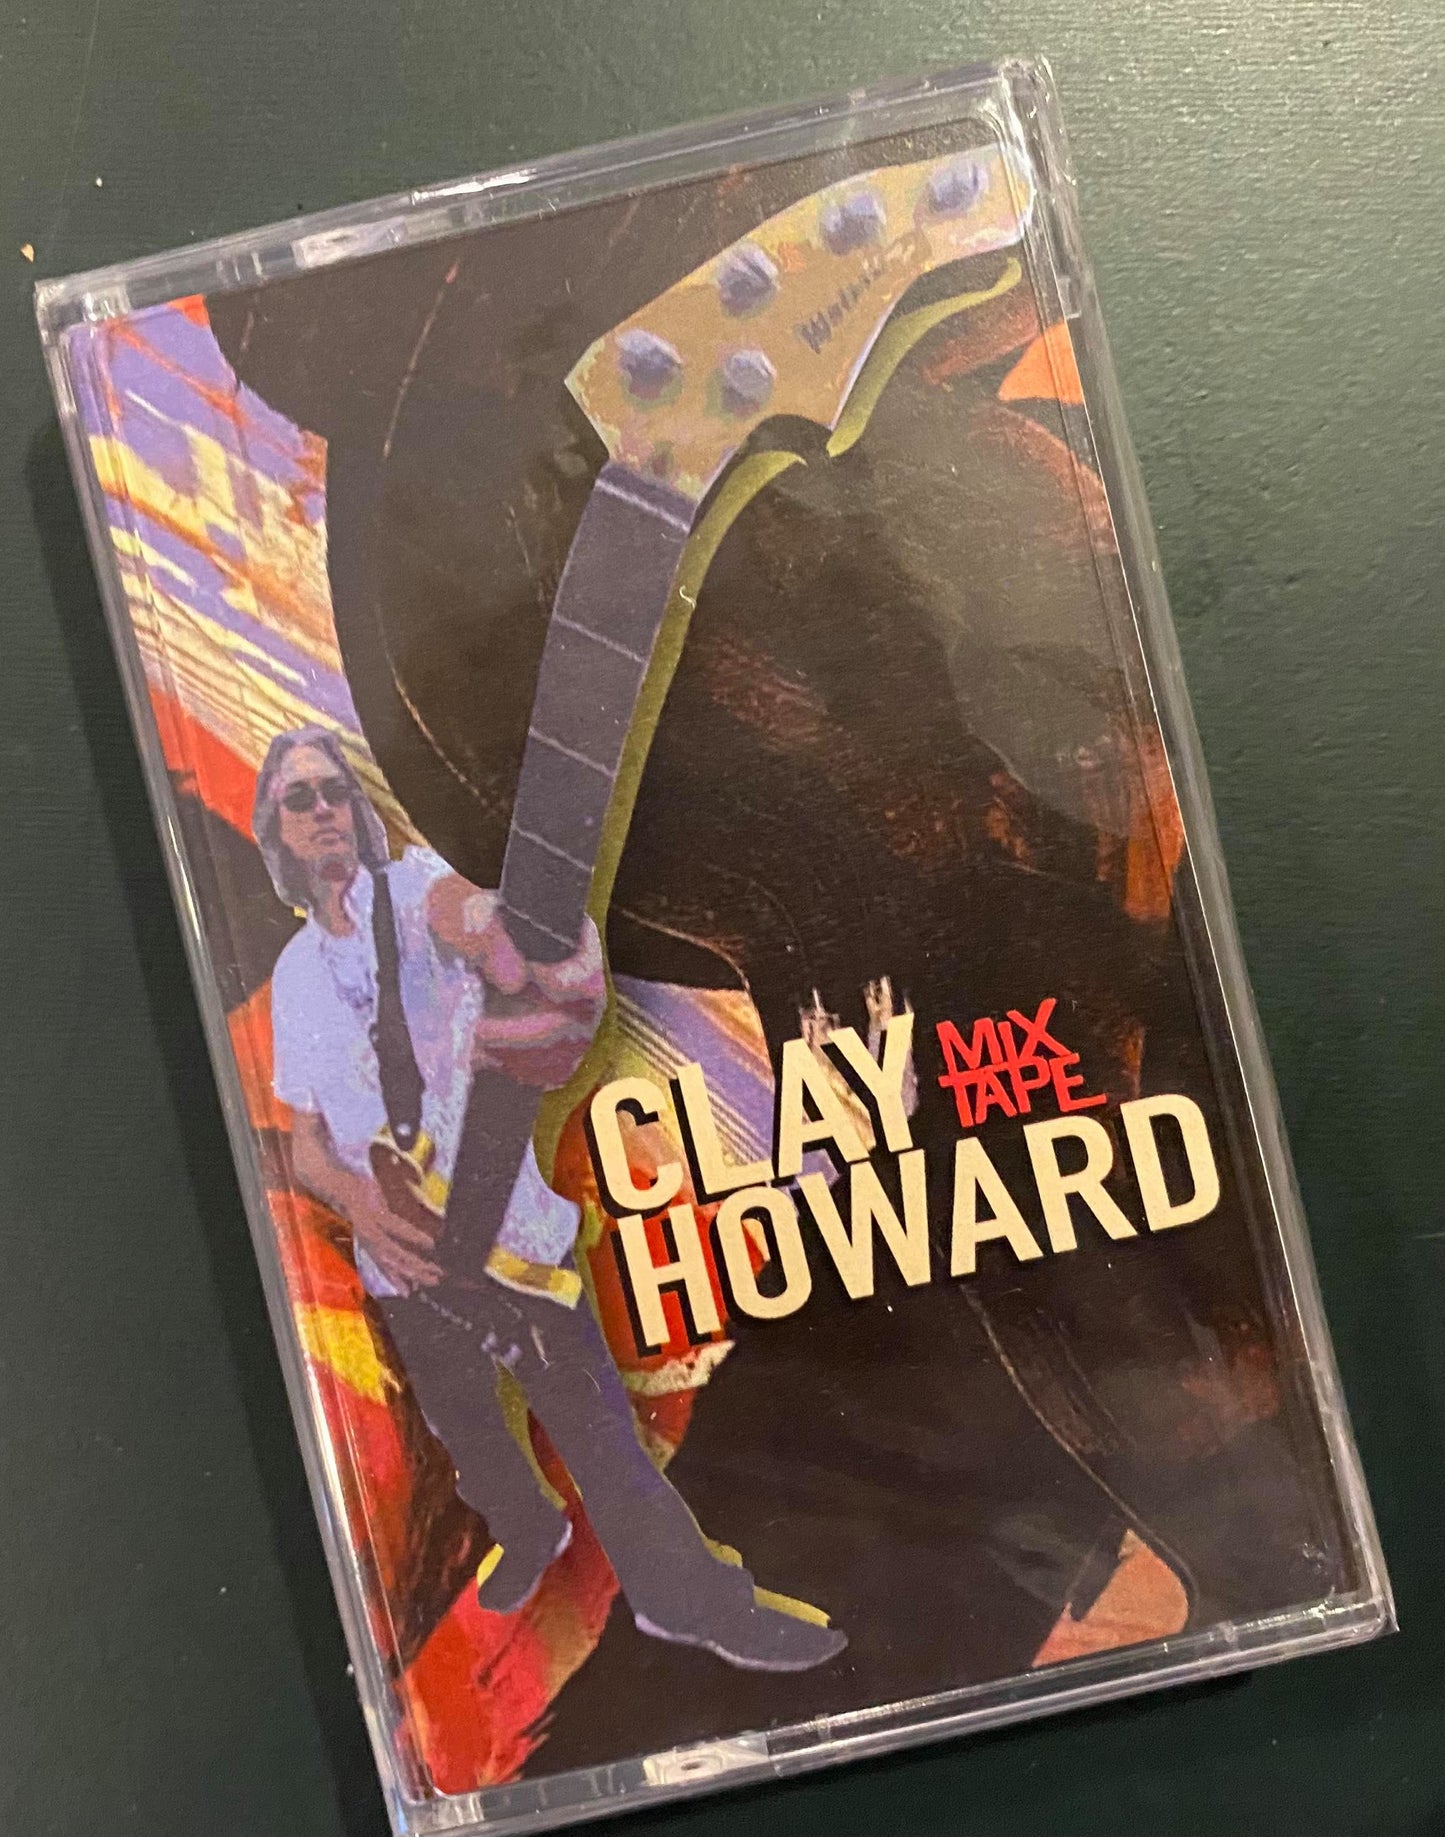 Clay Howard, "Mix Tape" [CASSETTE]